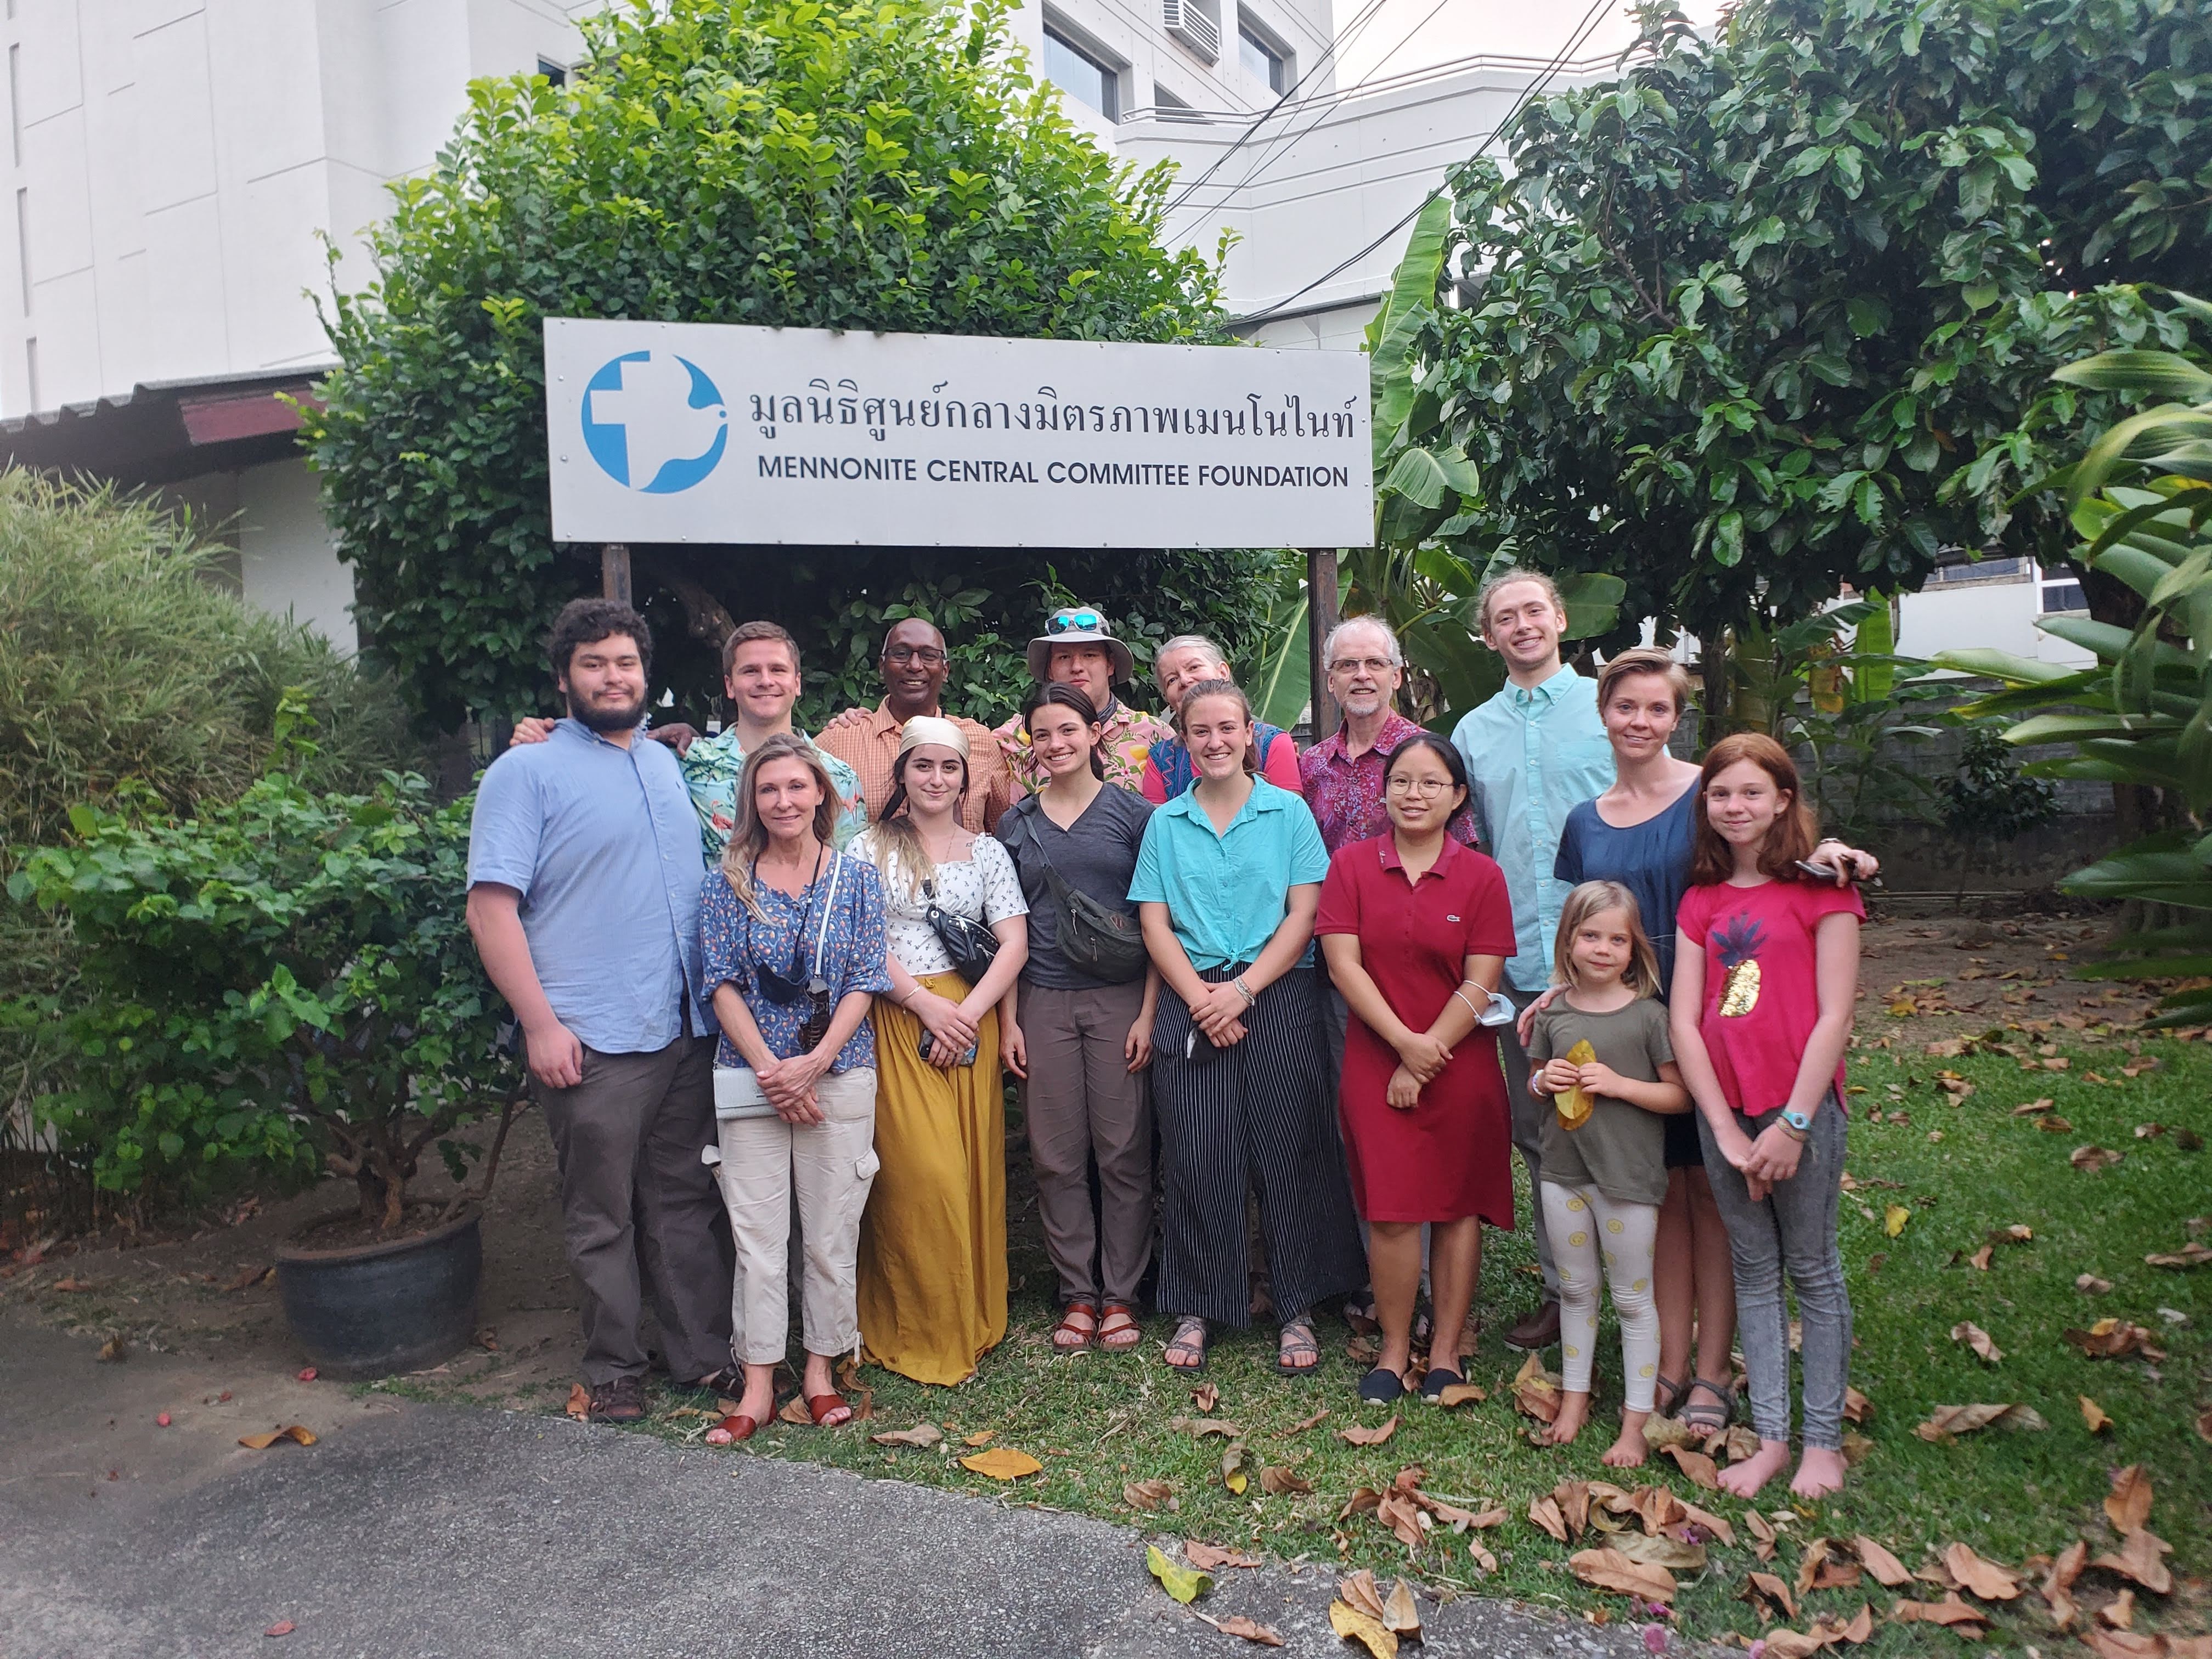 Mennonite Central Committee Chiang Mai regional branch